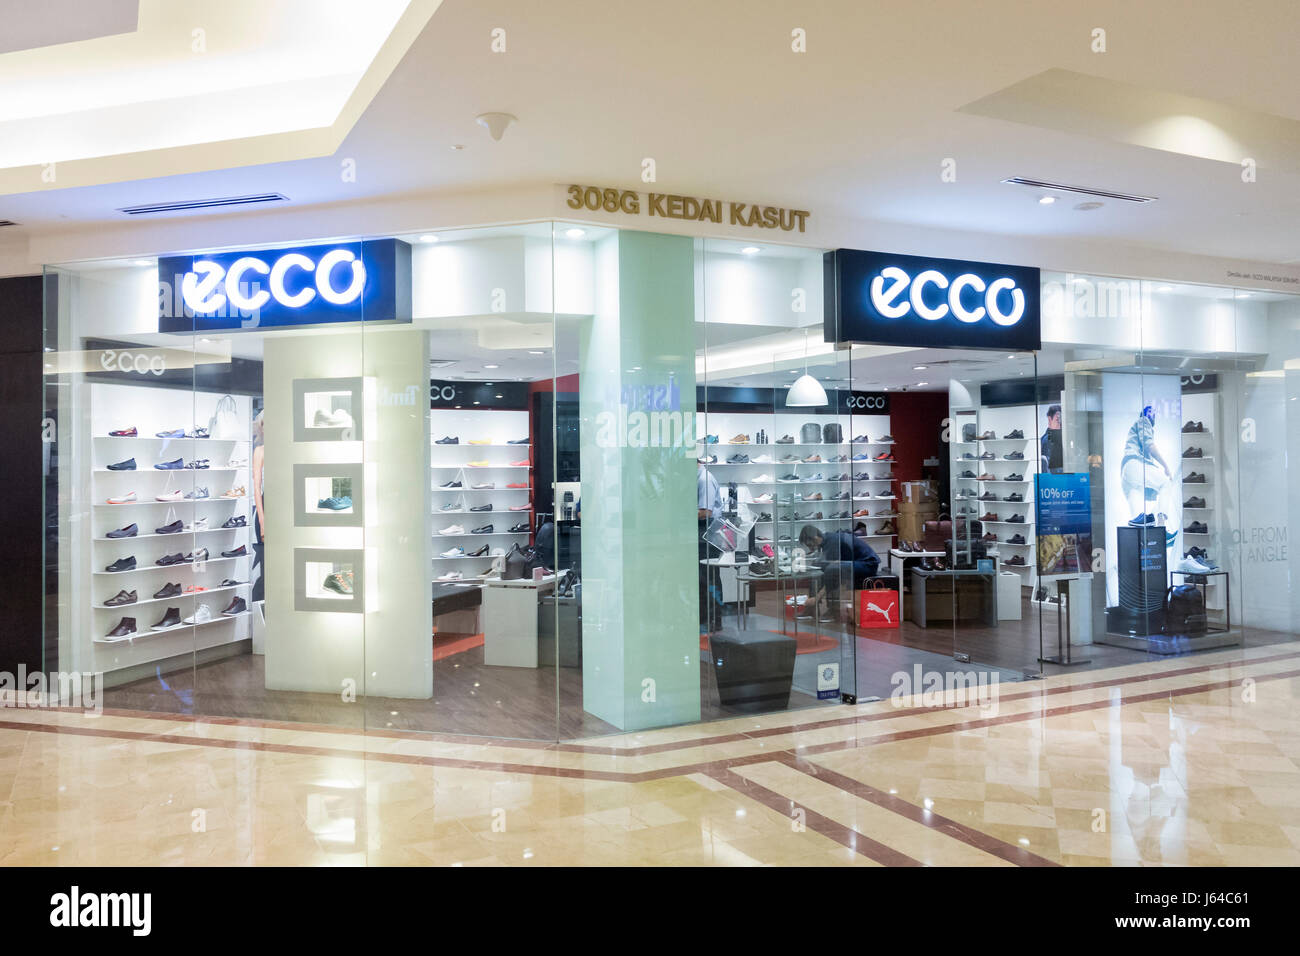 Ecco shop photography and images - Alamy